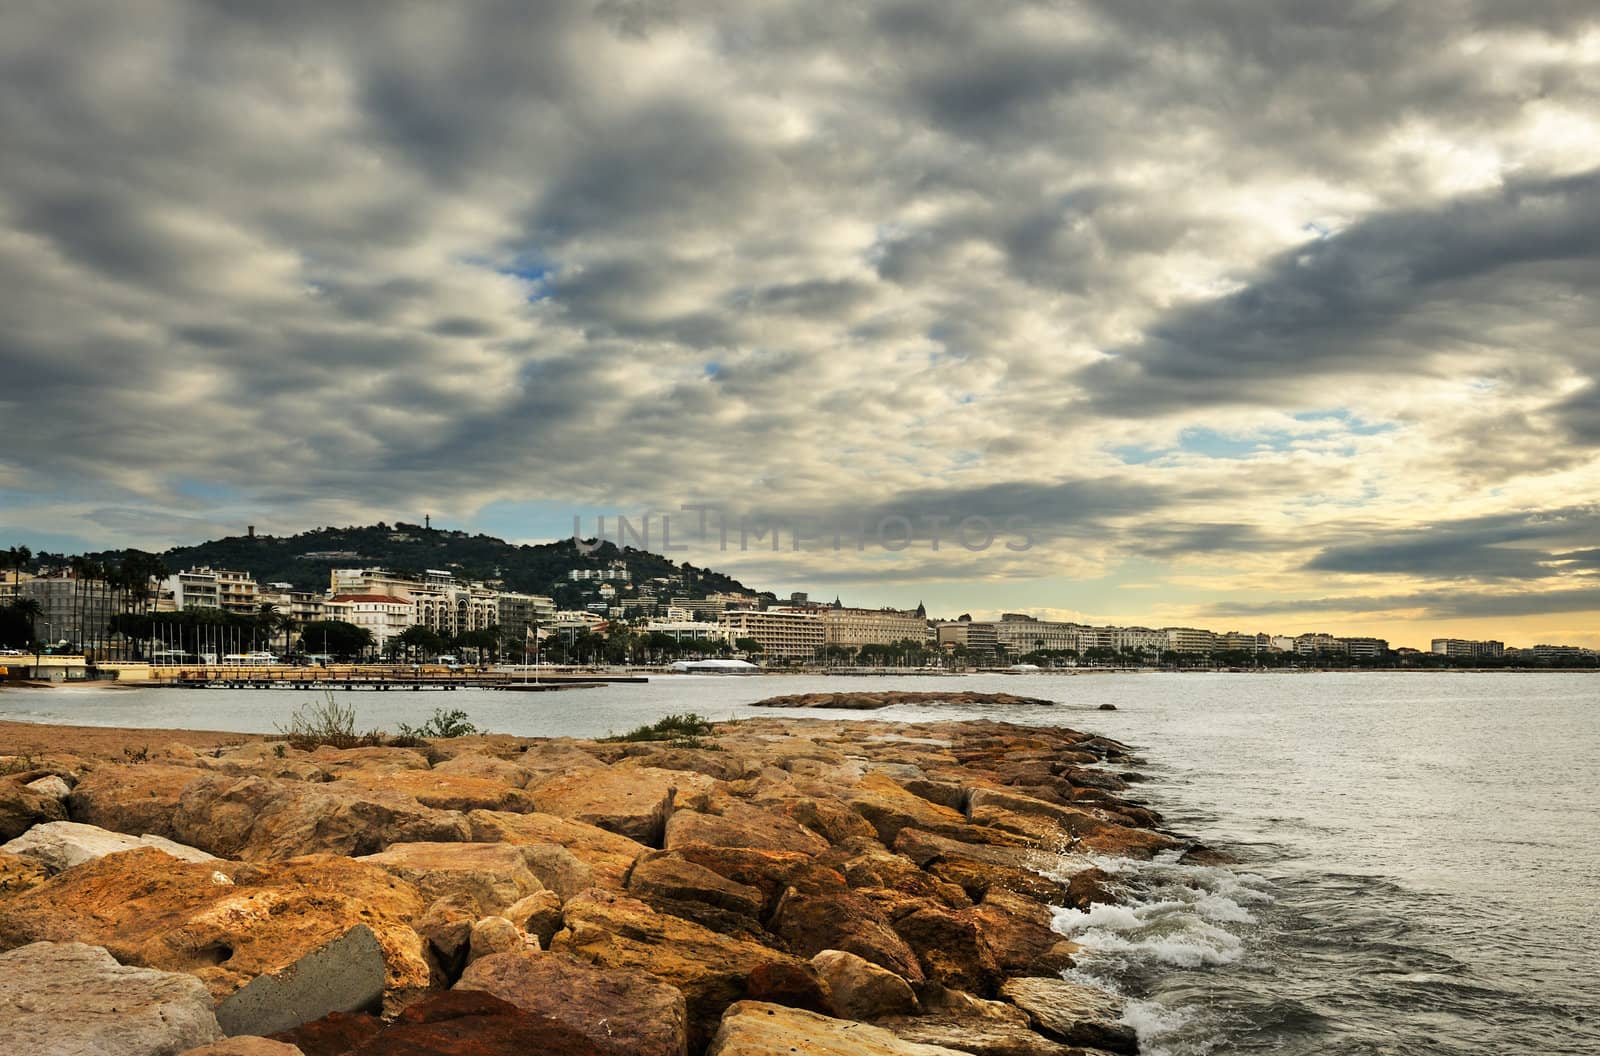 The city of Cannes in the French Riviera, during a cloudy morning